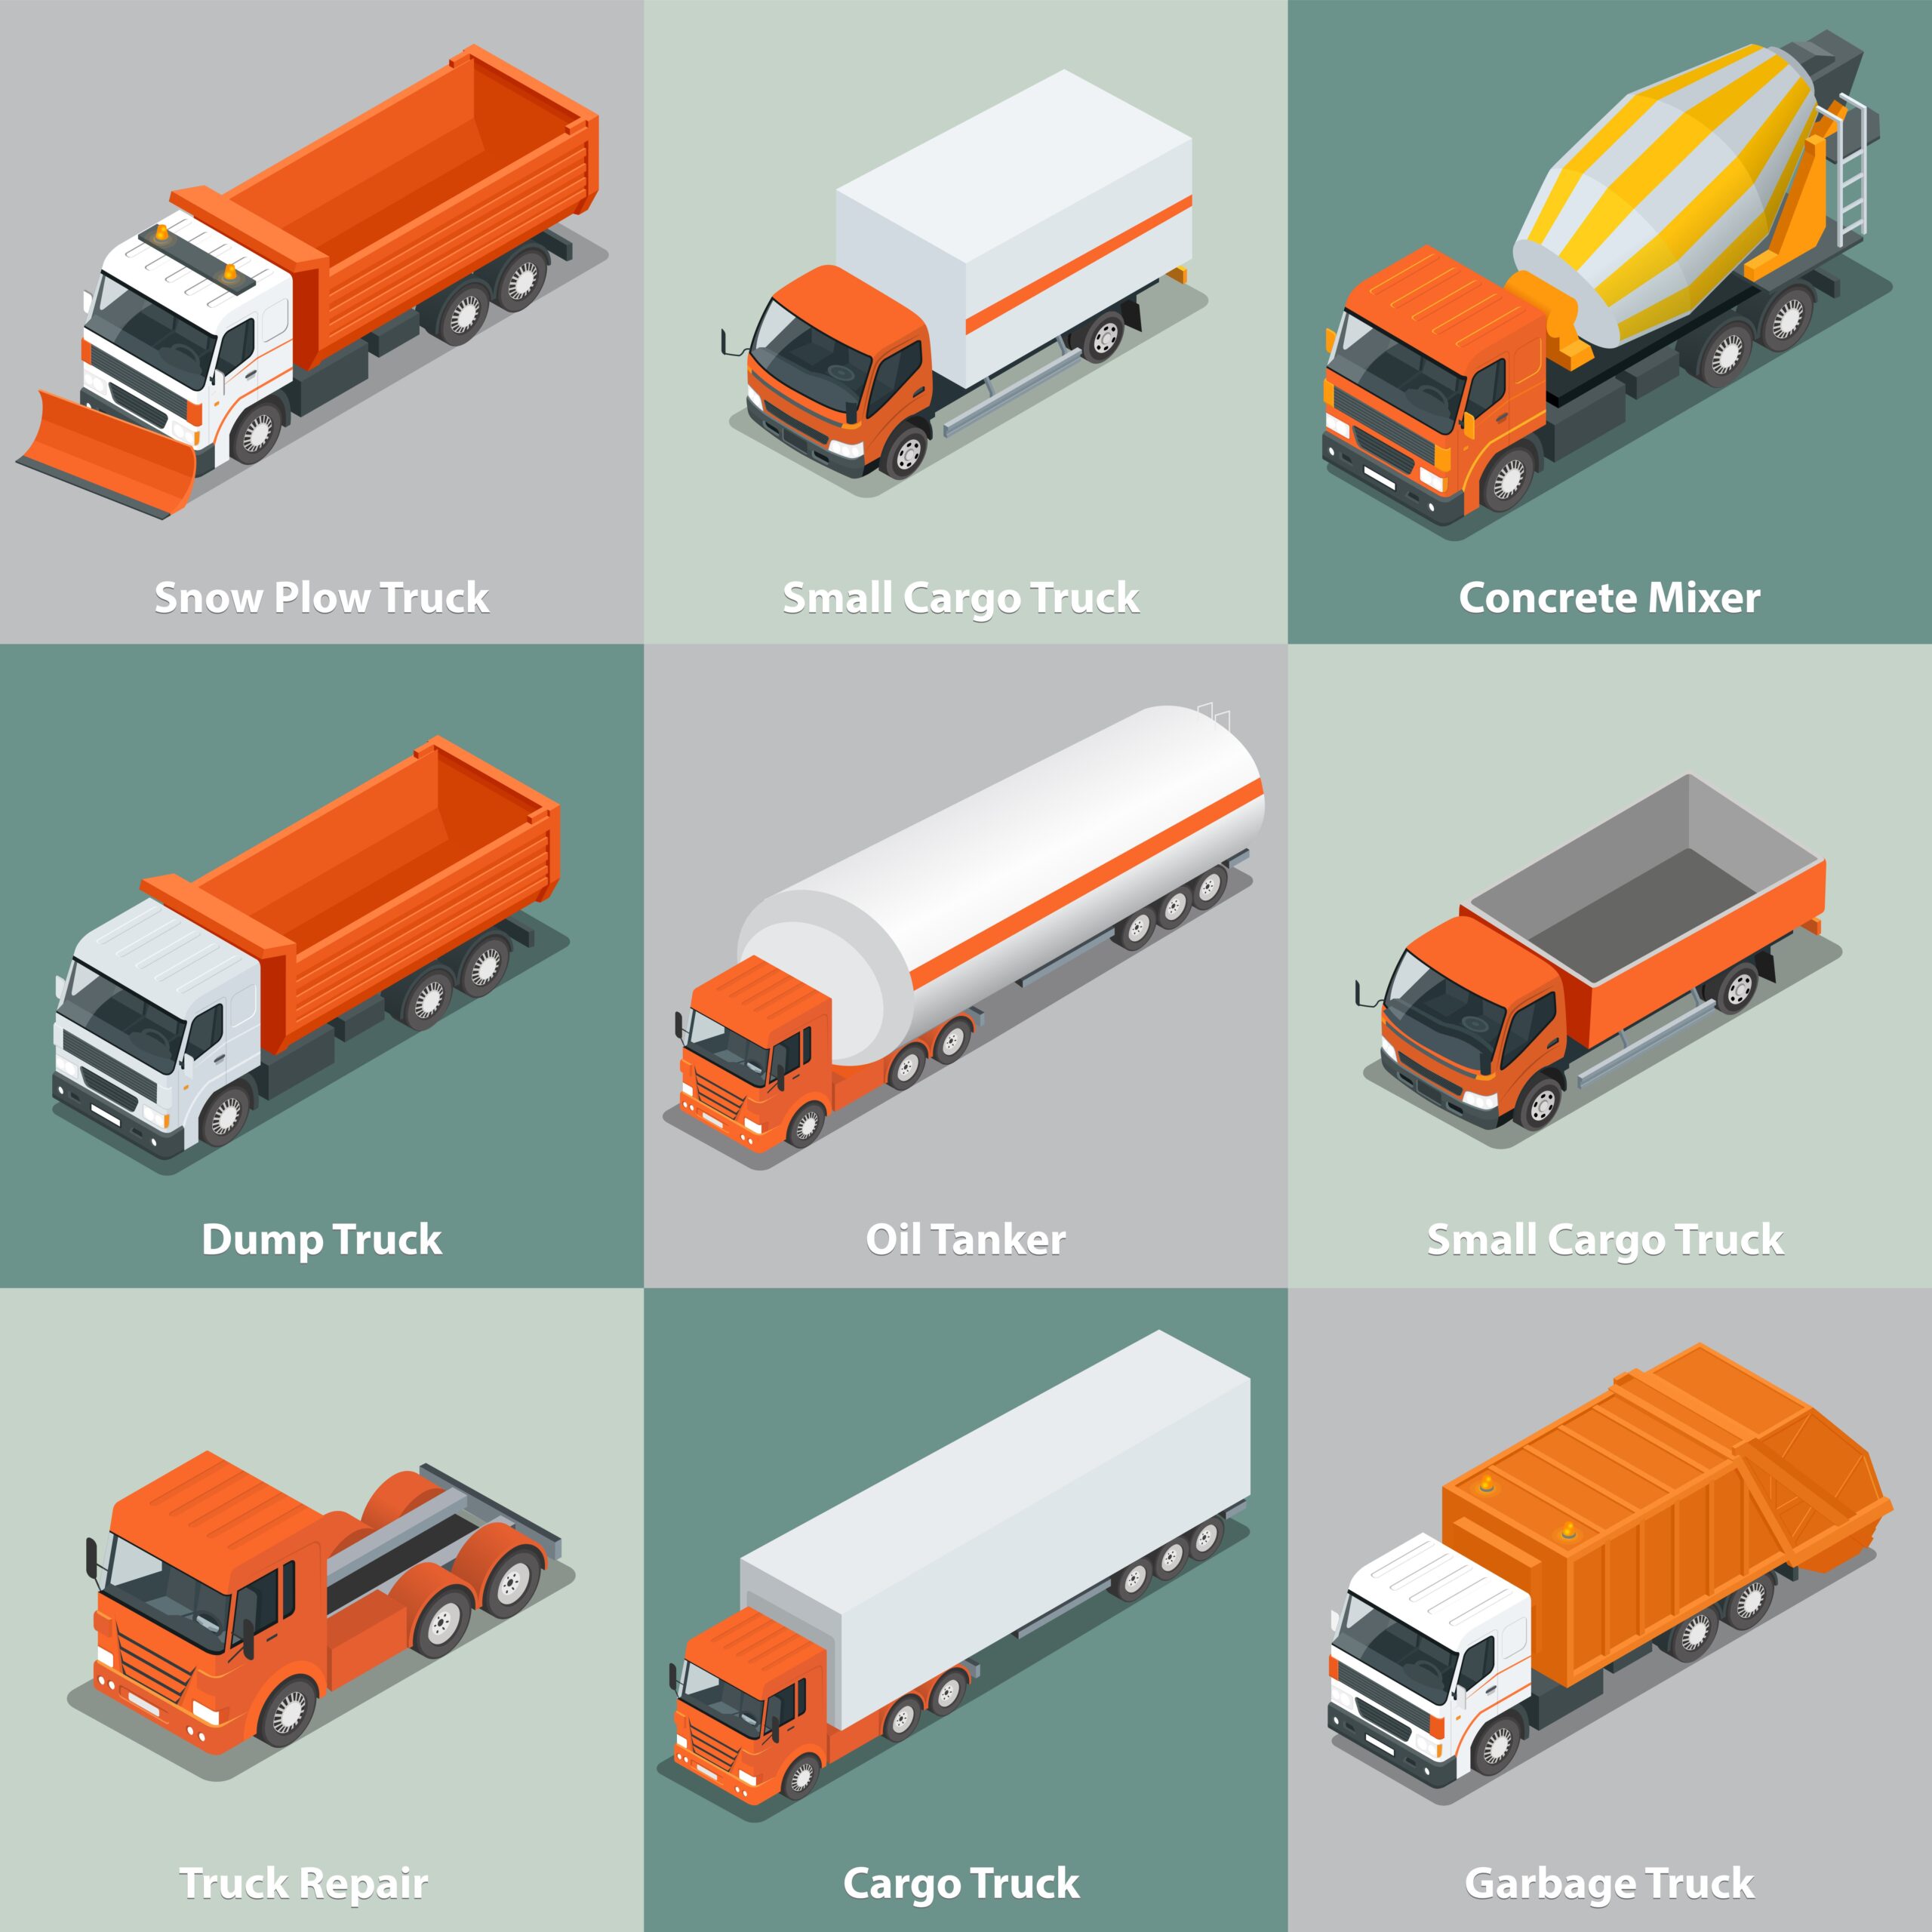 Types of NYC Truck wrecks